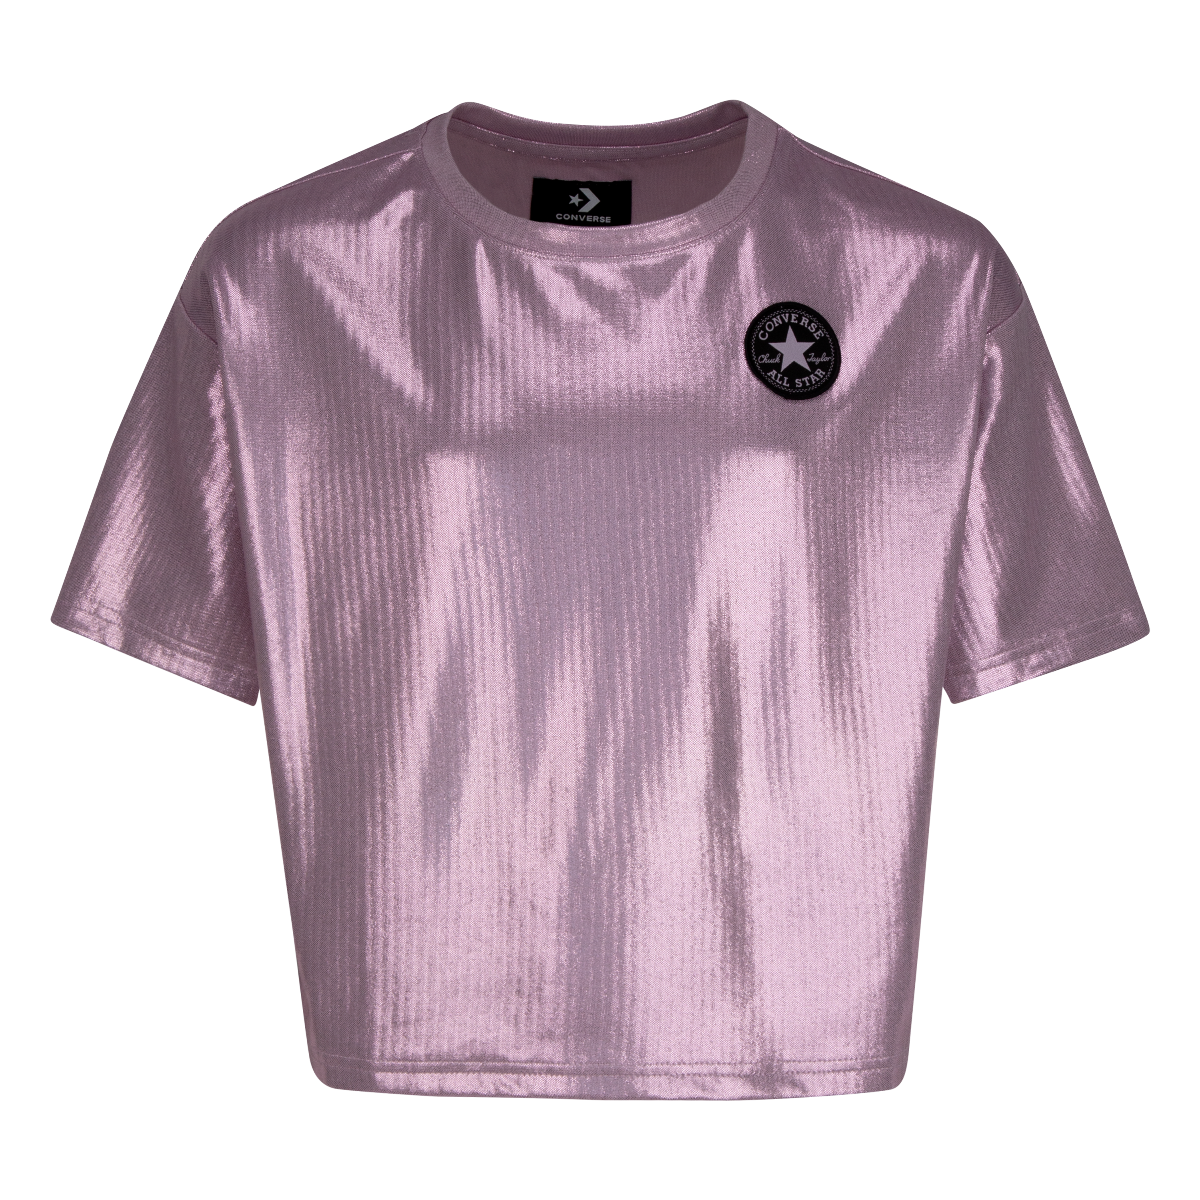 Converse Girls Boxy Foil Knit Top Young Adults Himalayan Salt Front View